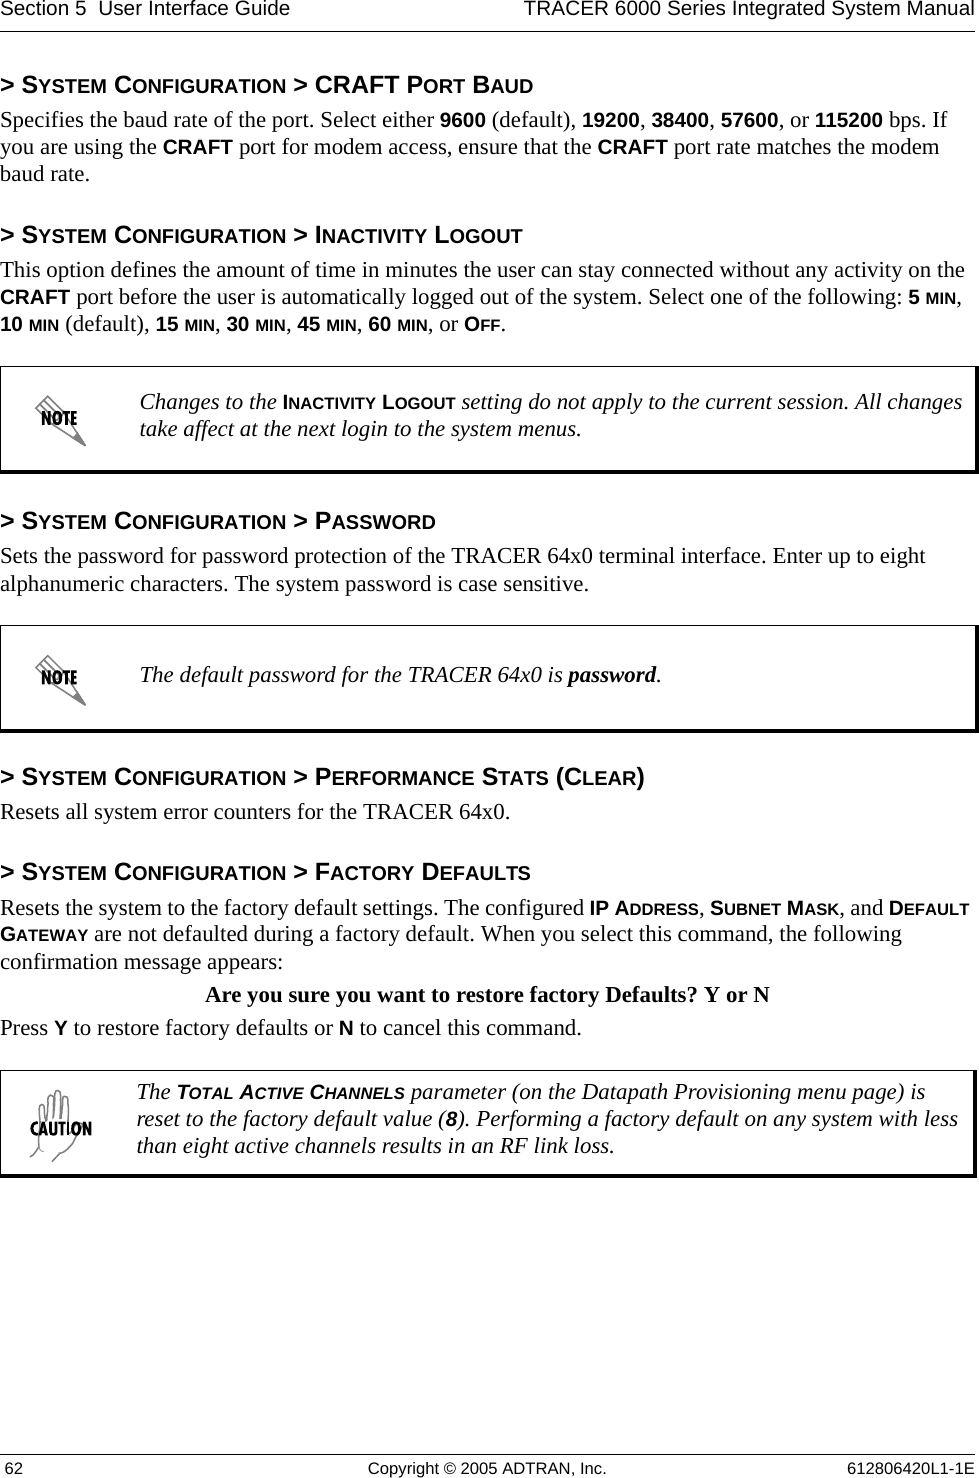 Section 5  User Interface Guide TRACER 6000 Series Integrated System Manual 62 Copyright © 2005 ADTRAN, Inc. 612806420L1-1E&gt; SYSTEM CONFIGURATION &gt; CRAFT PORT BAUDSpecifies the baud rate of the port. Select either 9600 (default), 19200, 38400, 57600, or 115200 bps. If you are using the CRAFT port for modem access, ensure that the CRAFT port rate matches the modem baud rate.&gt; SYSTEM CONFIGURATION &gt; INACTIVITY LOGOUTThis option defines the amount of time in minutes the user can stay connected without any activity on the CRAFT port before the user is automatically logged out of the system. Select one of the following: 5 MIN, 10 MIN (default), 15 MIN, 30 MIN, 45 MIN, 60 MIN, or OFF.&gt; SYSTEM CONFIGURATION &gt; PASSWORDSets the password for password protection of the TRACER 64x0 terminal interface. Enter up to eight alphanumeric characters. The system password is case sensitive.&gt; SYSTEM CONFIGURATION &gt; PERFORMANCE STATS (CLEAR)Resets all system error counters for the TRACER 64x0.&gt; SYSTEM CONFIGURATION &gt; FACTORY DEFAULTSResets the system to the factory default settings. The configured IP ADDRESS, SUBNET MASK, and DEFAULT GATEWAY are not defaulted during a factory default. When you select this command, the following confirmation message appears: Are you sure you want to restore factory Defaults? Y or NPress Y to restore factory defaults or N to cancel this command.Changes to the INACTIVITY LOGOUT setting do not apply to the current session. All changes take affect at the next login to the system menus.The default password for the TRACER 64x0 is password.The TOTAL ACTIVE CHANNELS parameter (on the Datapath Provisioning menu page) is reset to the factory default value (8). Performing a factory default on any system with less than eight active channels results in an RF link loss. 